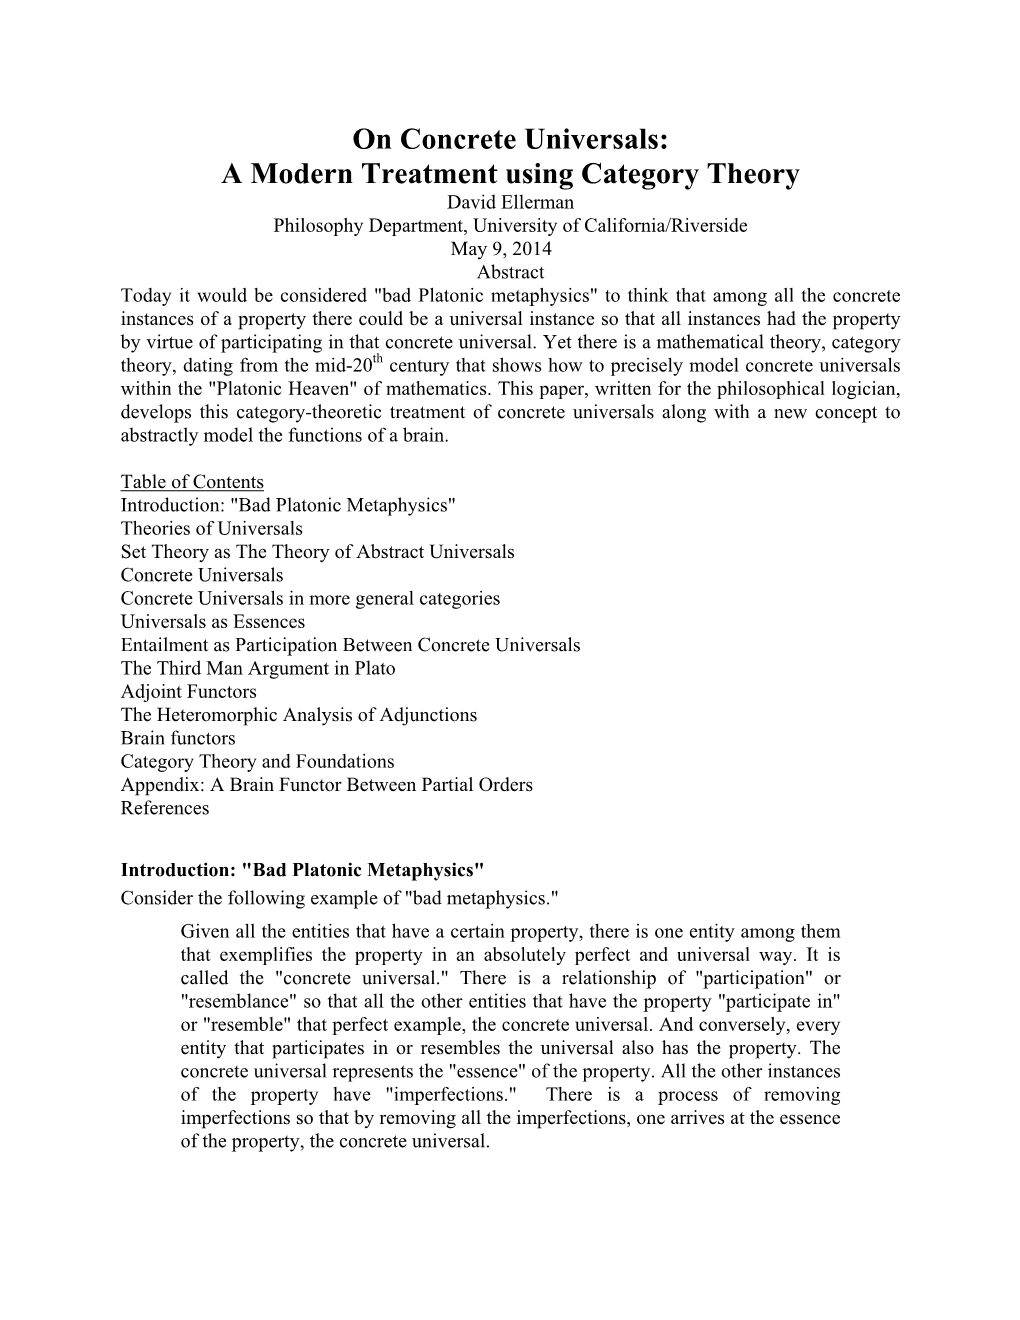 On Concrete Universals and Category Theory